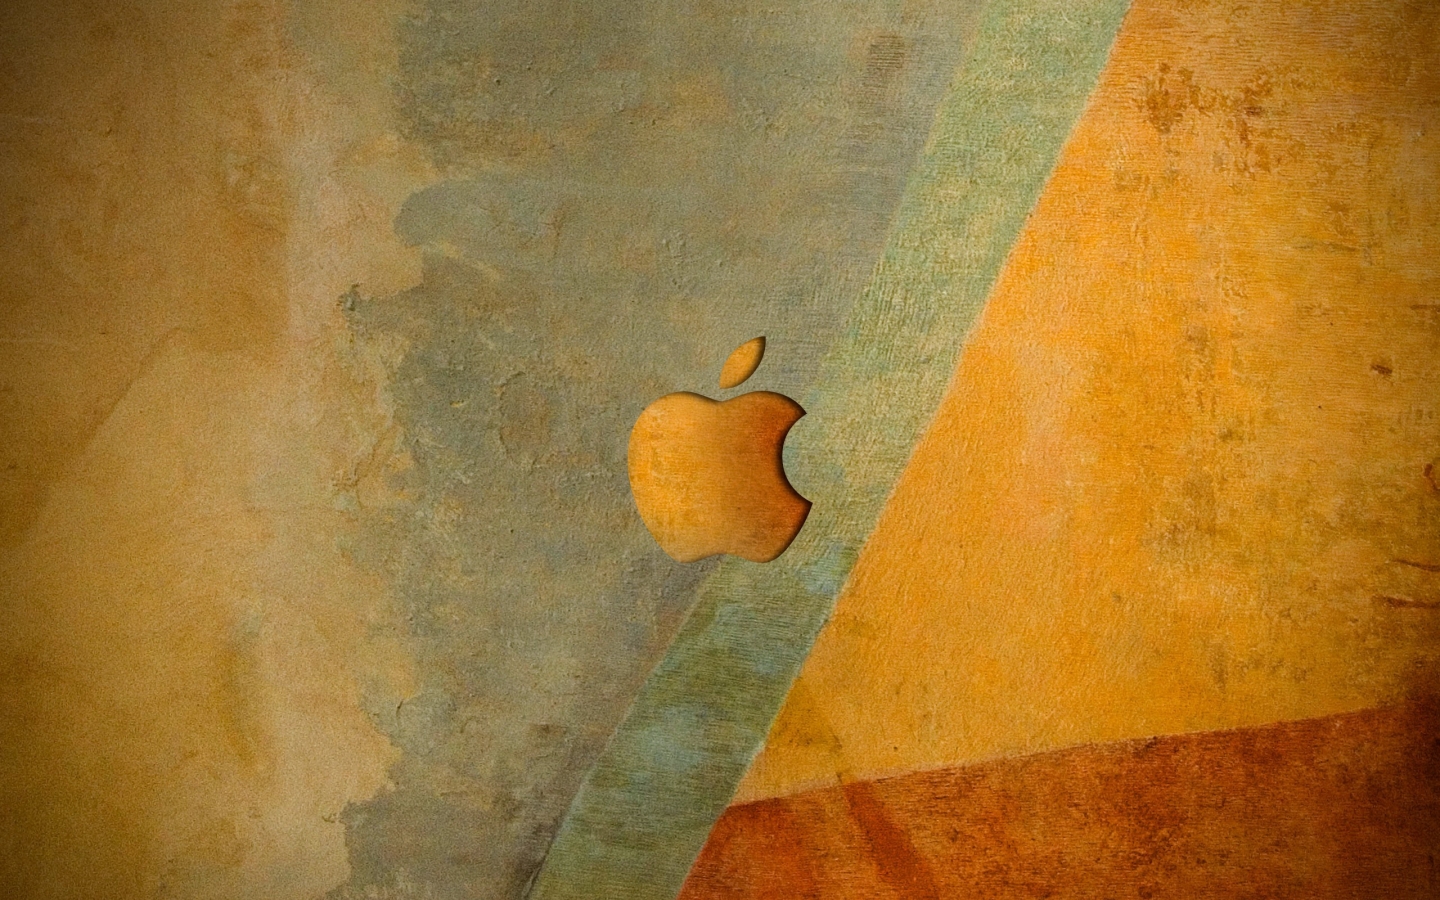 Different Apple Logo for 1440 x 900 widescreen resolution